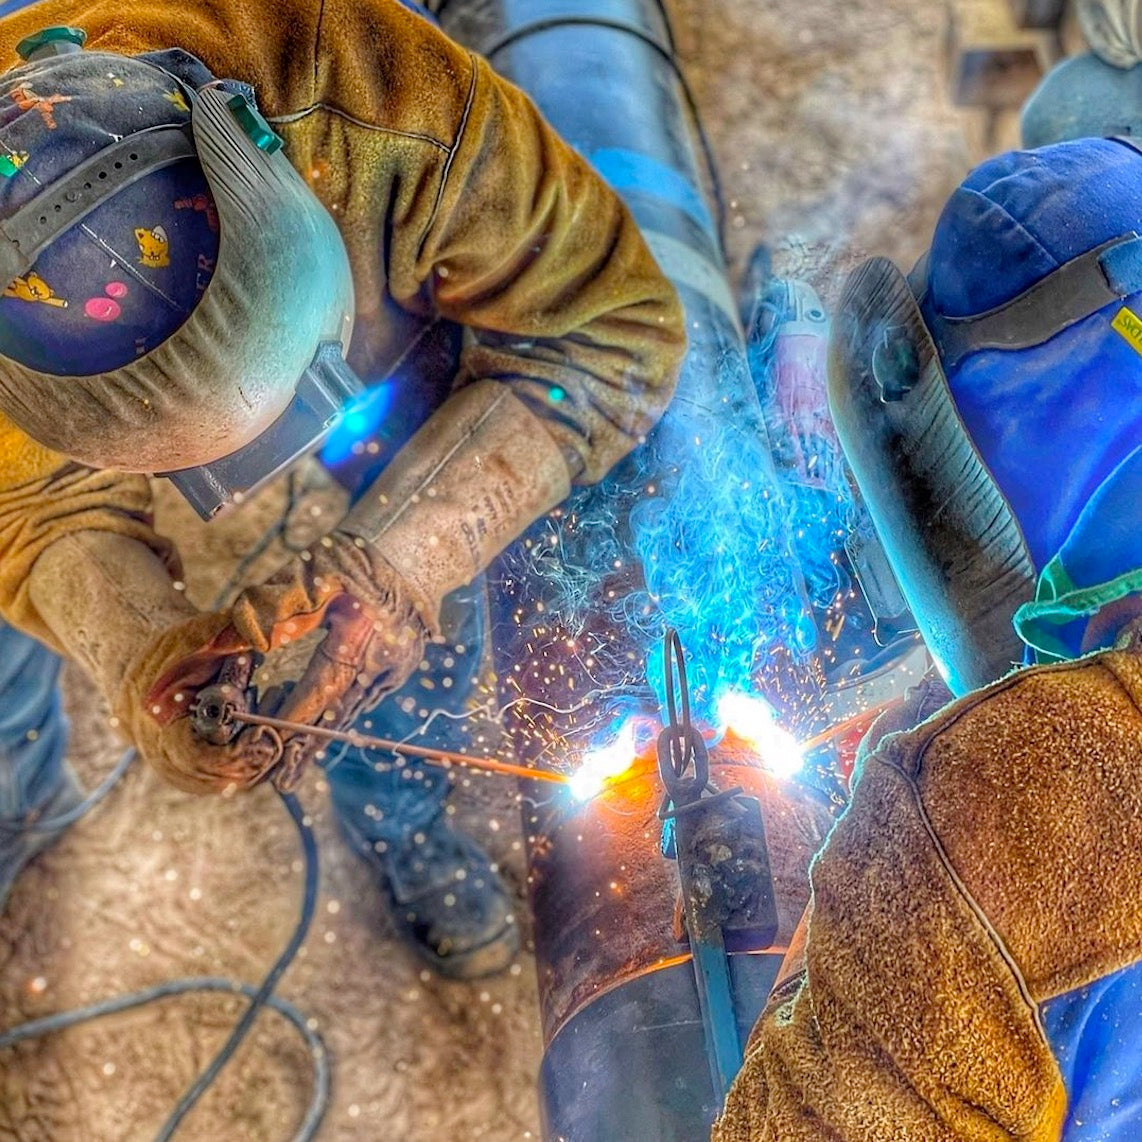 What is the hardest weld to master?